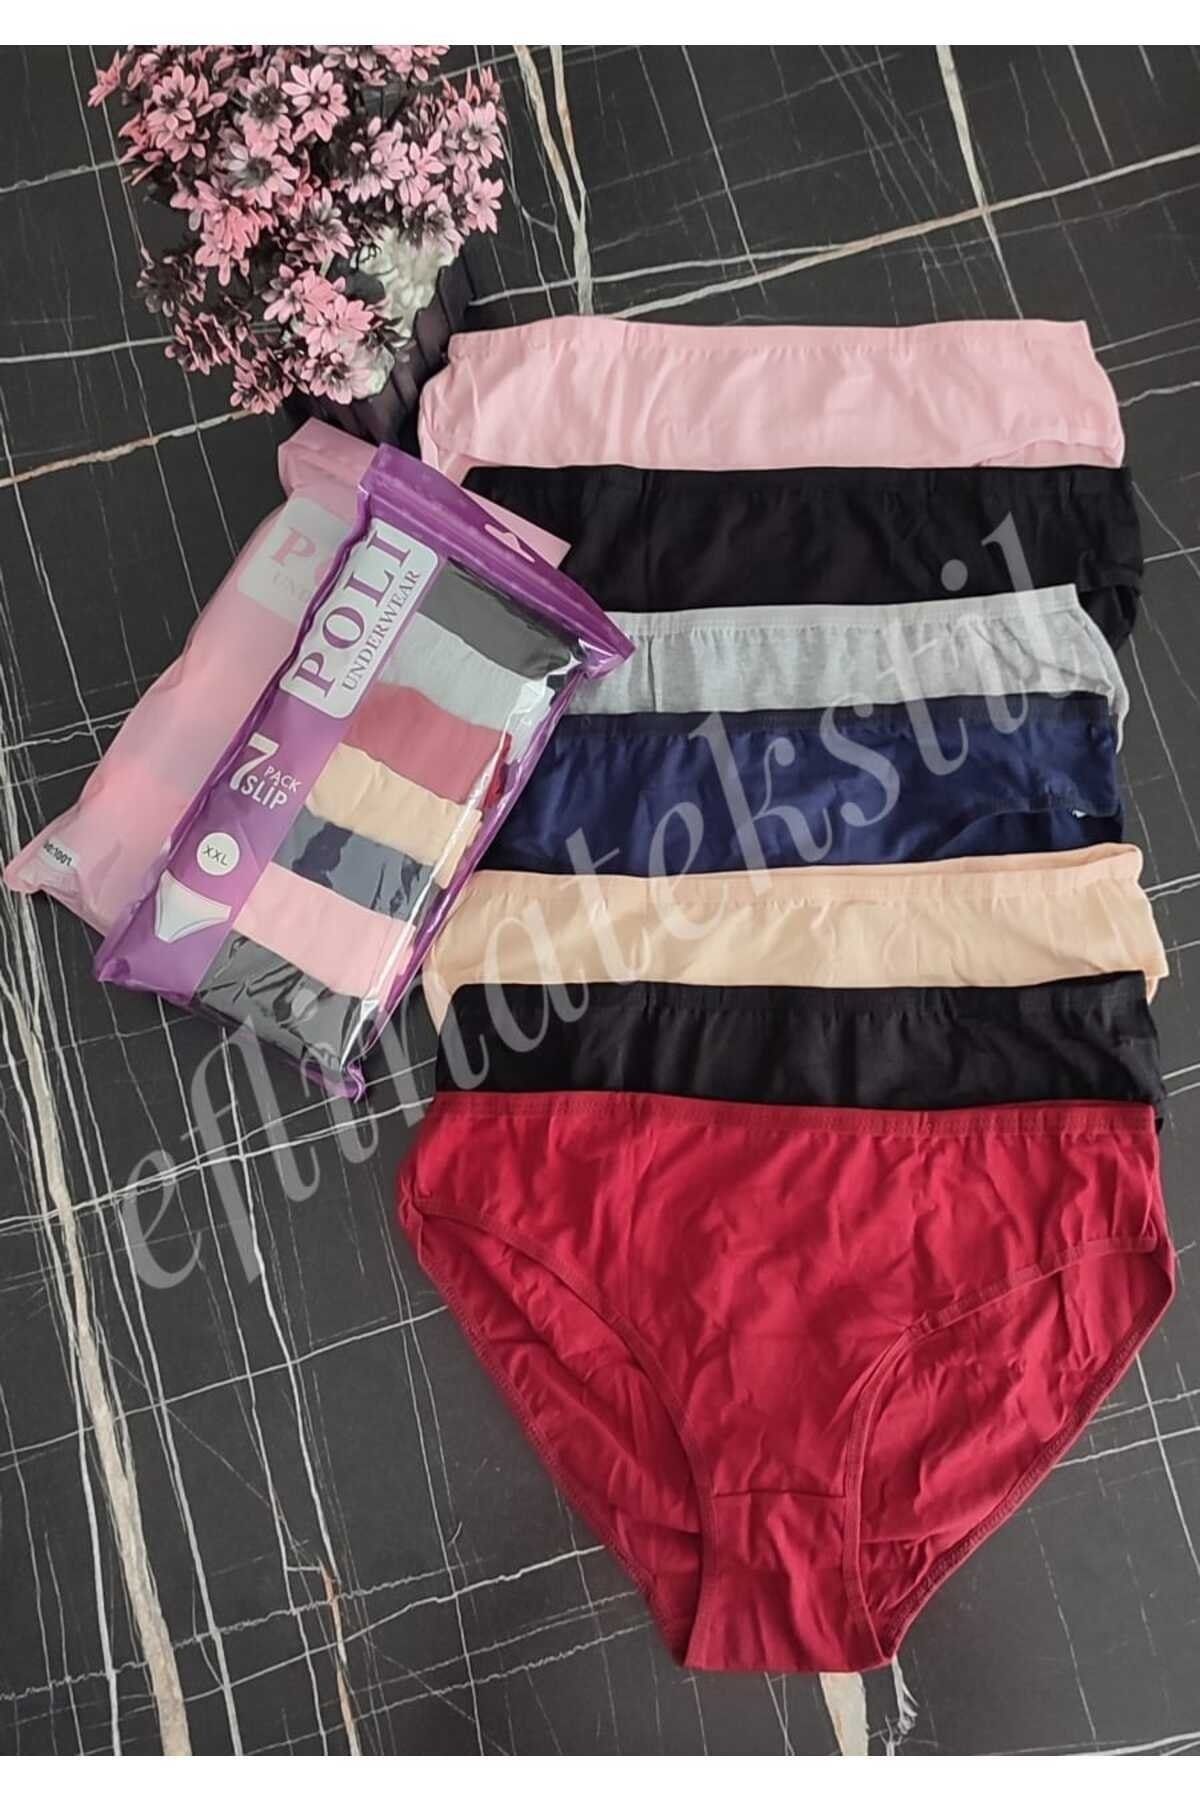 7-pack 'Wishes' cotton panties